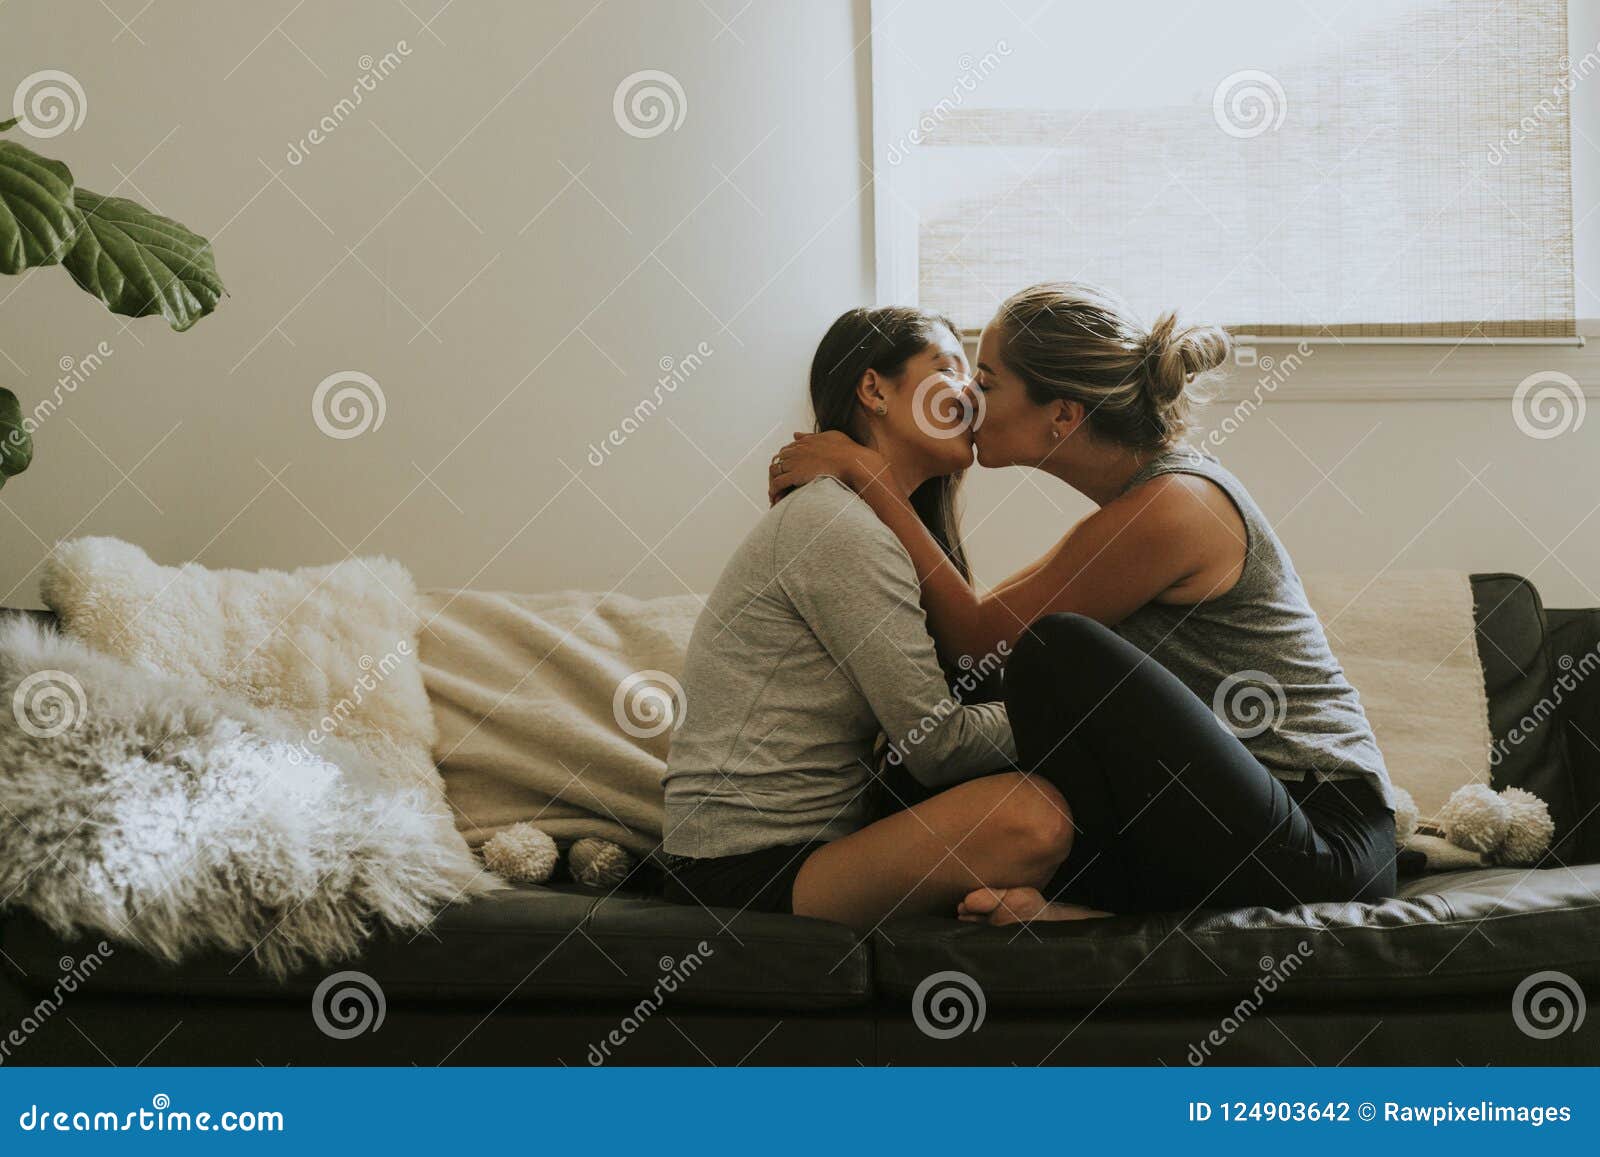 chad seeley recommends Lesbians Kissing On Couch